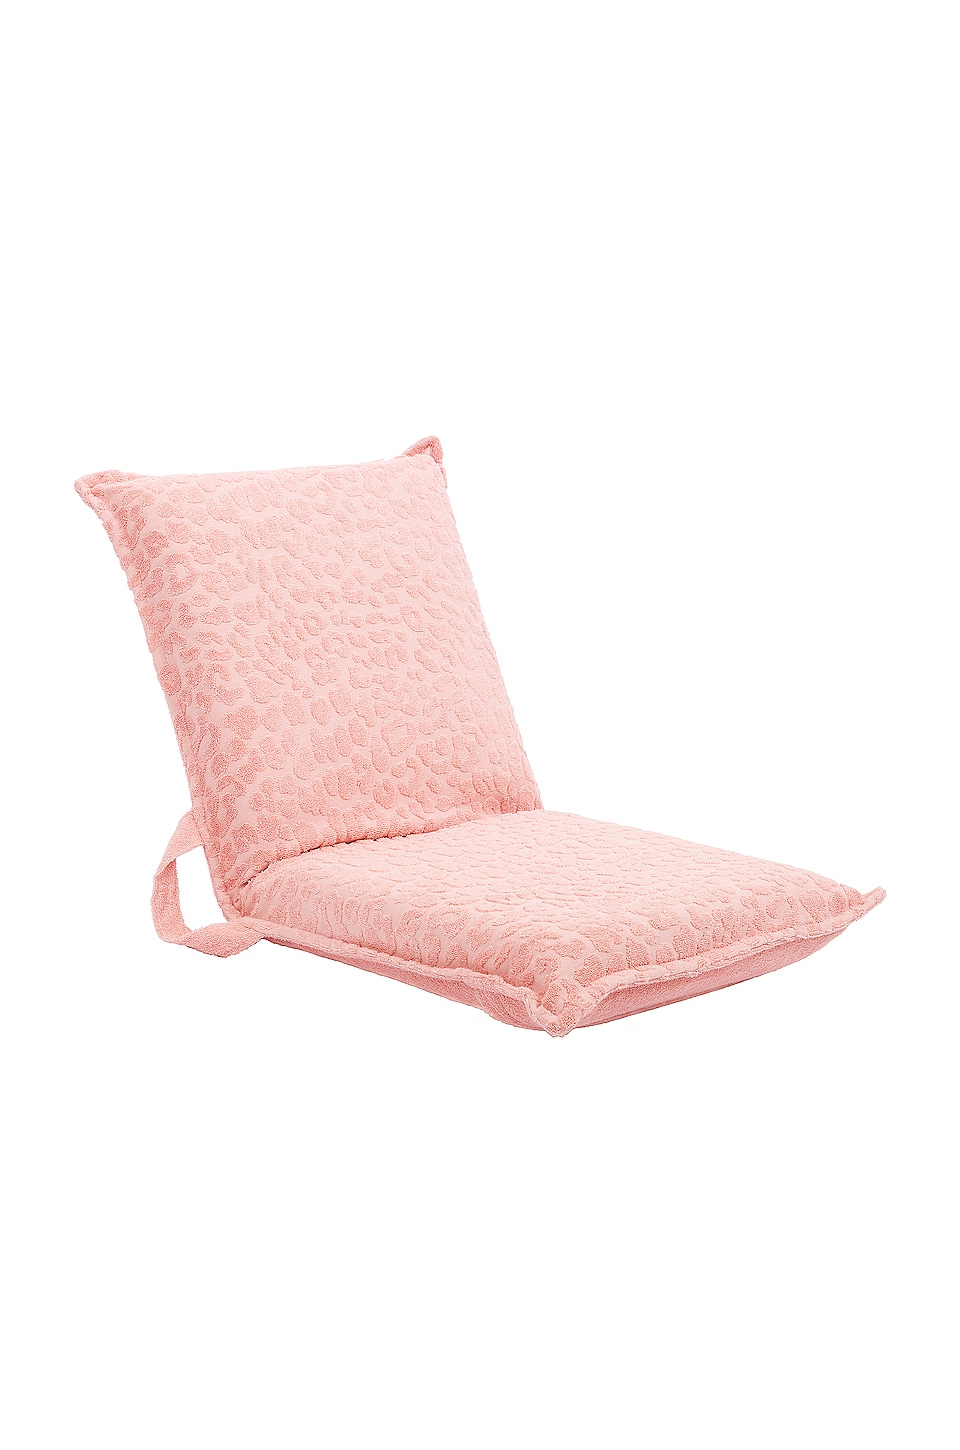 Sunnylife Call Of The Wild Terry Travel Lounger Blush Pink